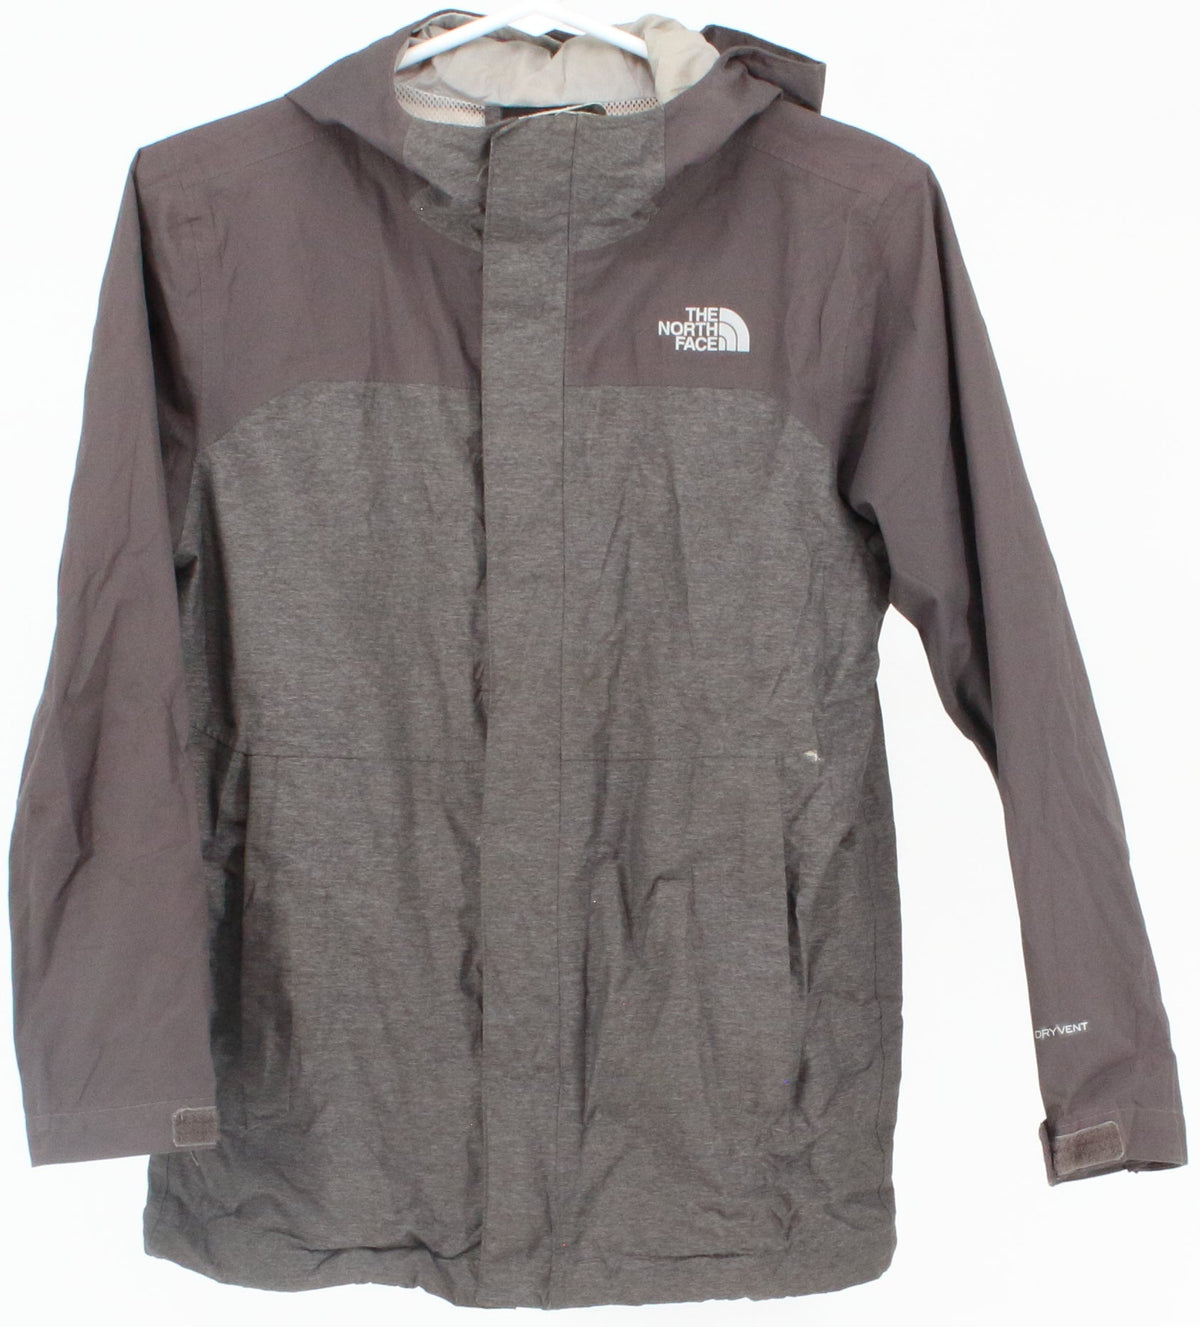 The North Face DryVent Grey Children's Jacket